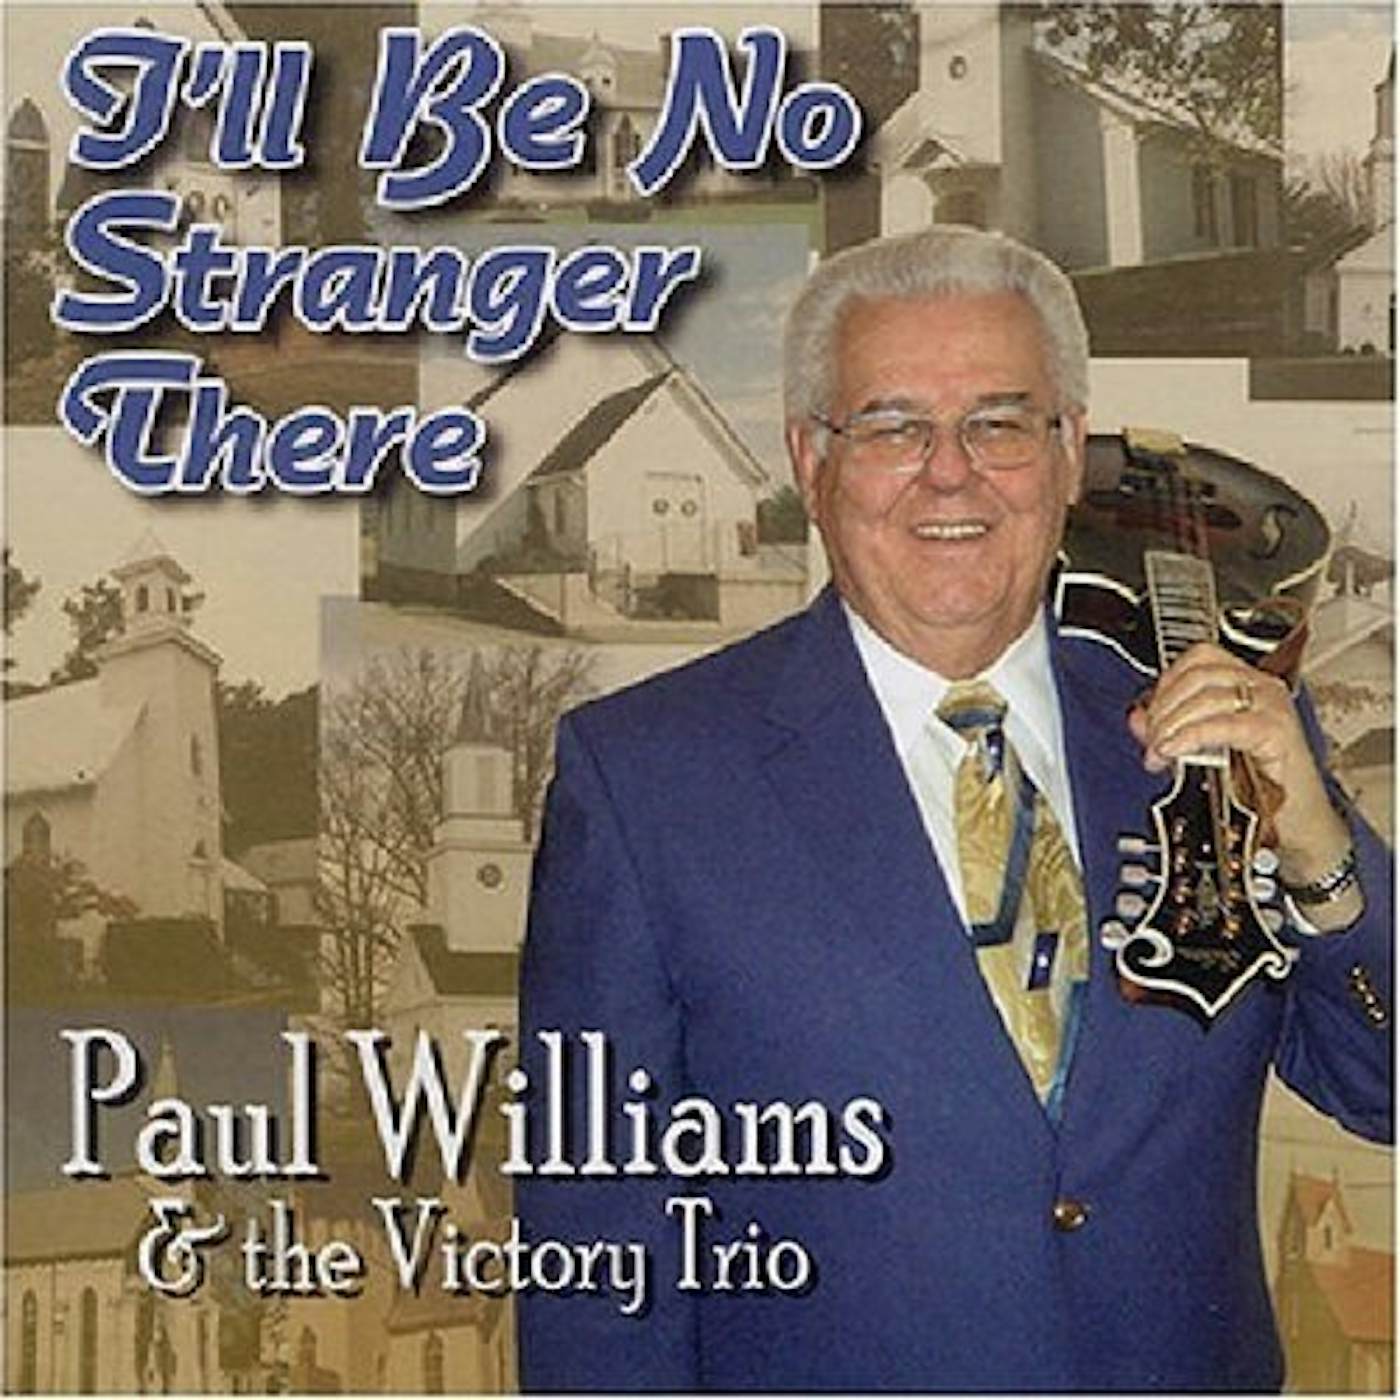 Paul Williams I'LL BE NO STRANGER THERE CD